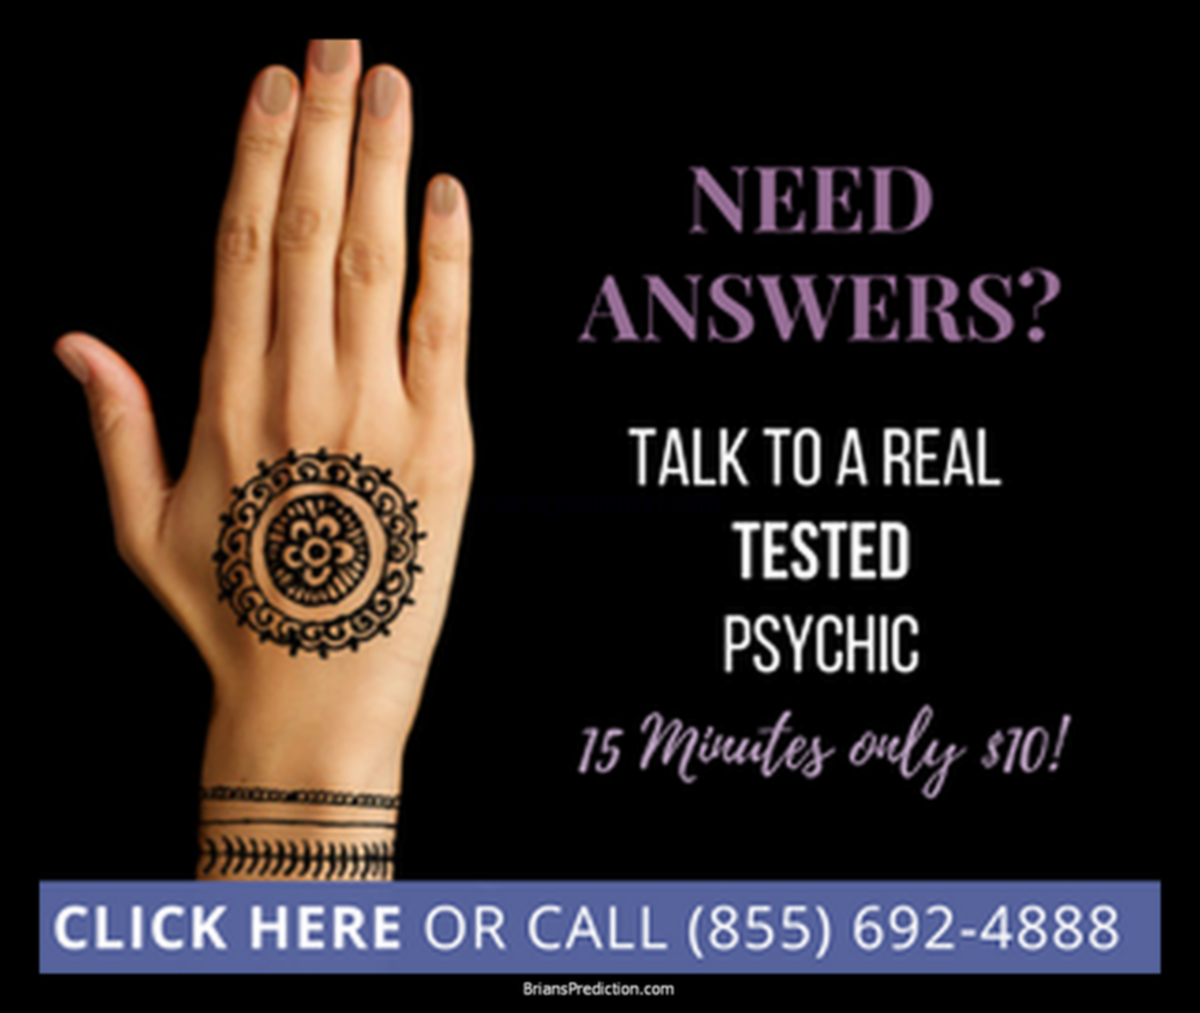 asknow 5 Psychic Predictions by Brian Ladd recommended psychics
asknow 5 Psychic Predictions by Brian Ladd recommended psychics
